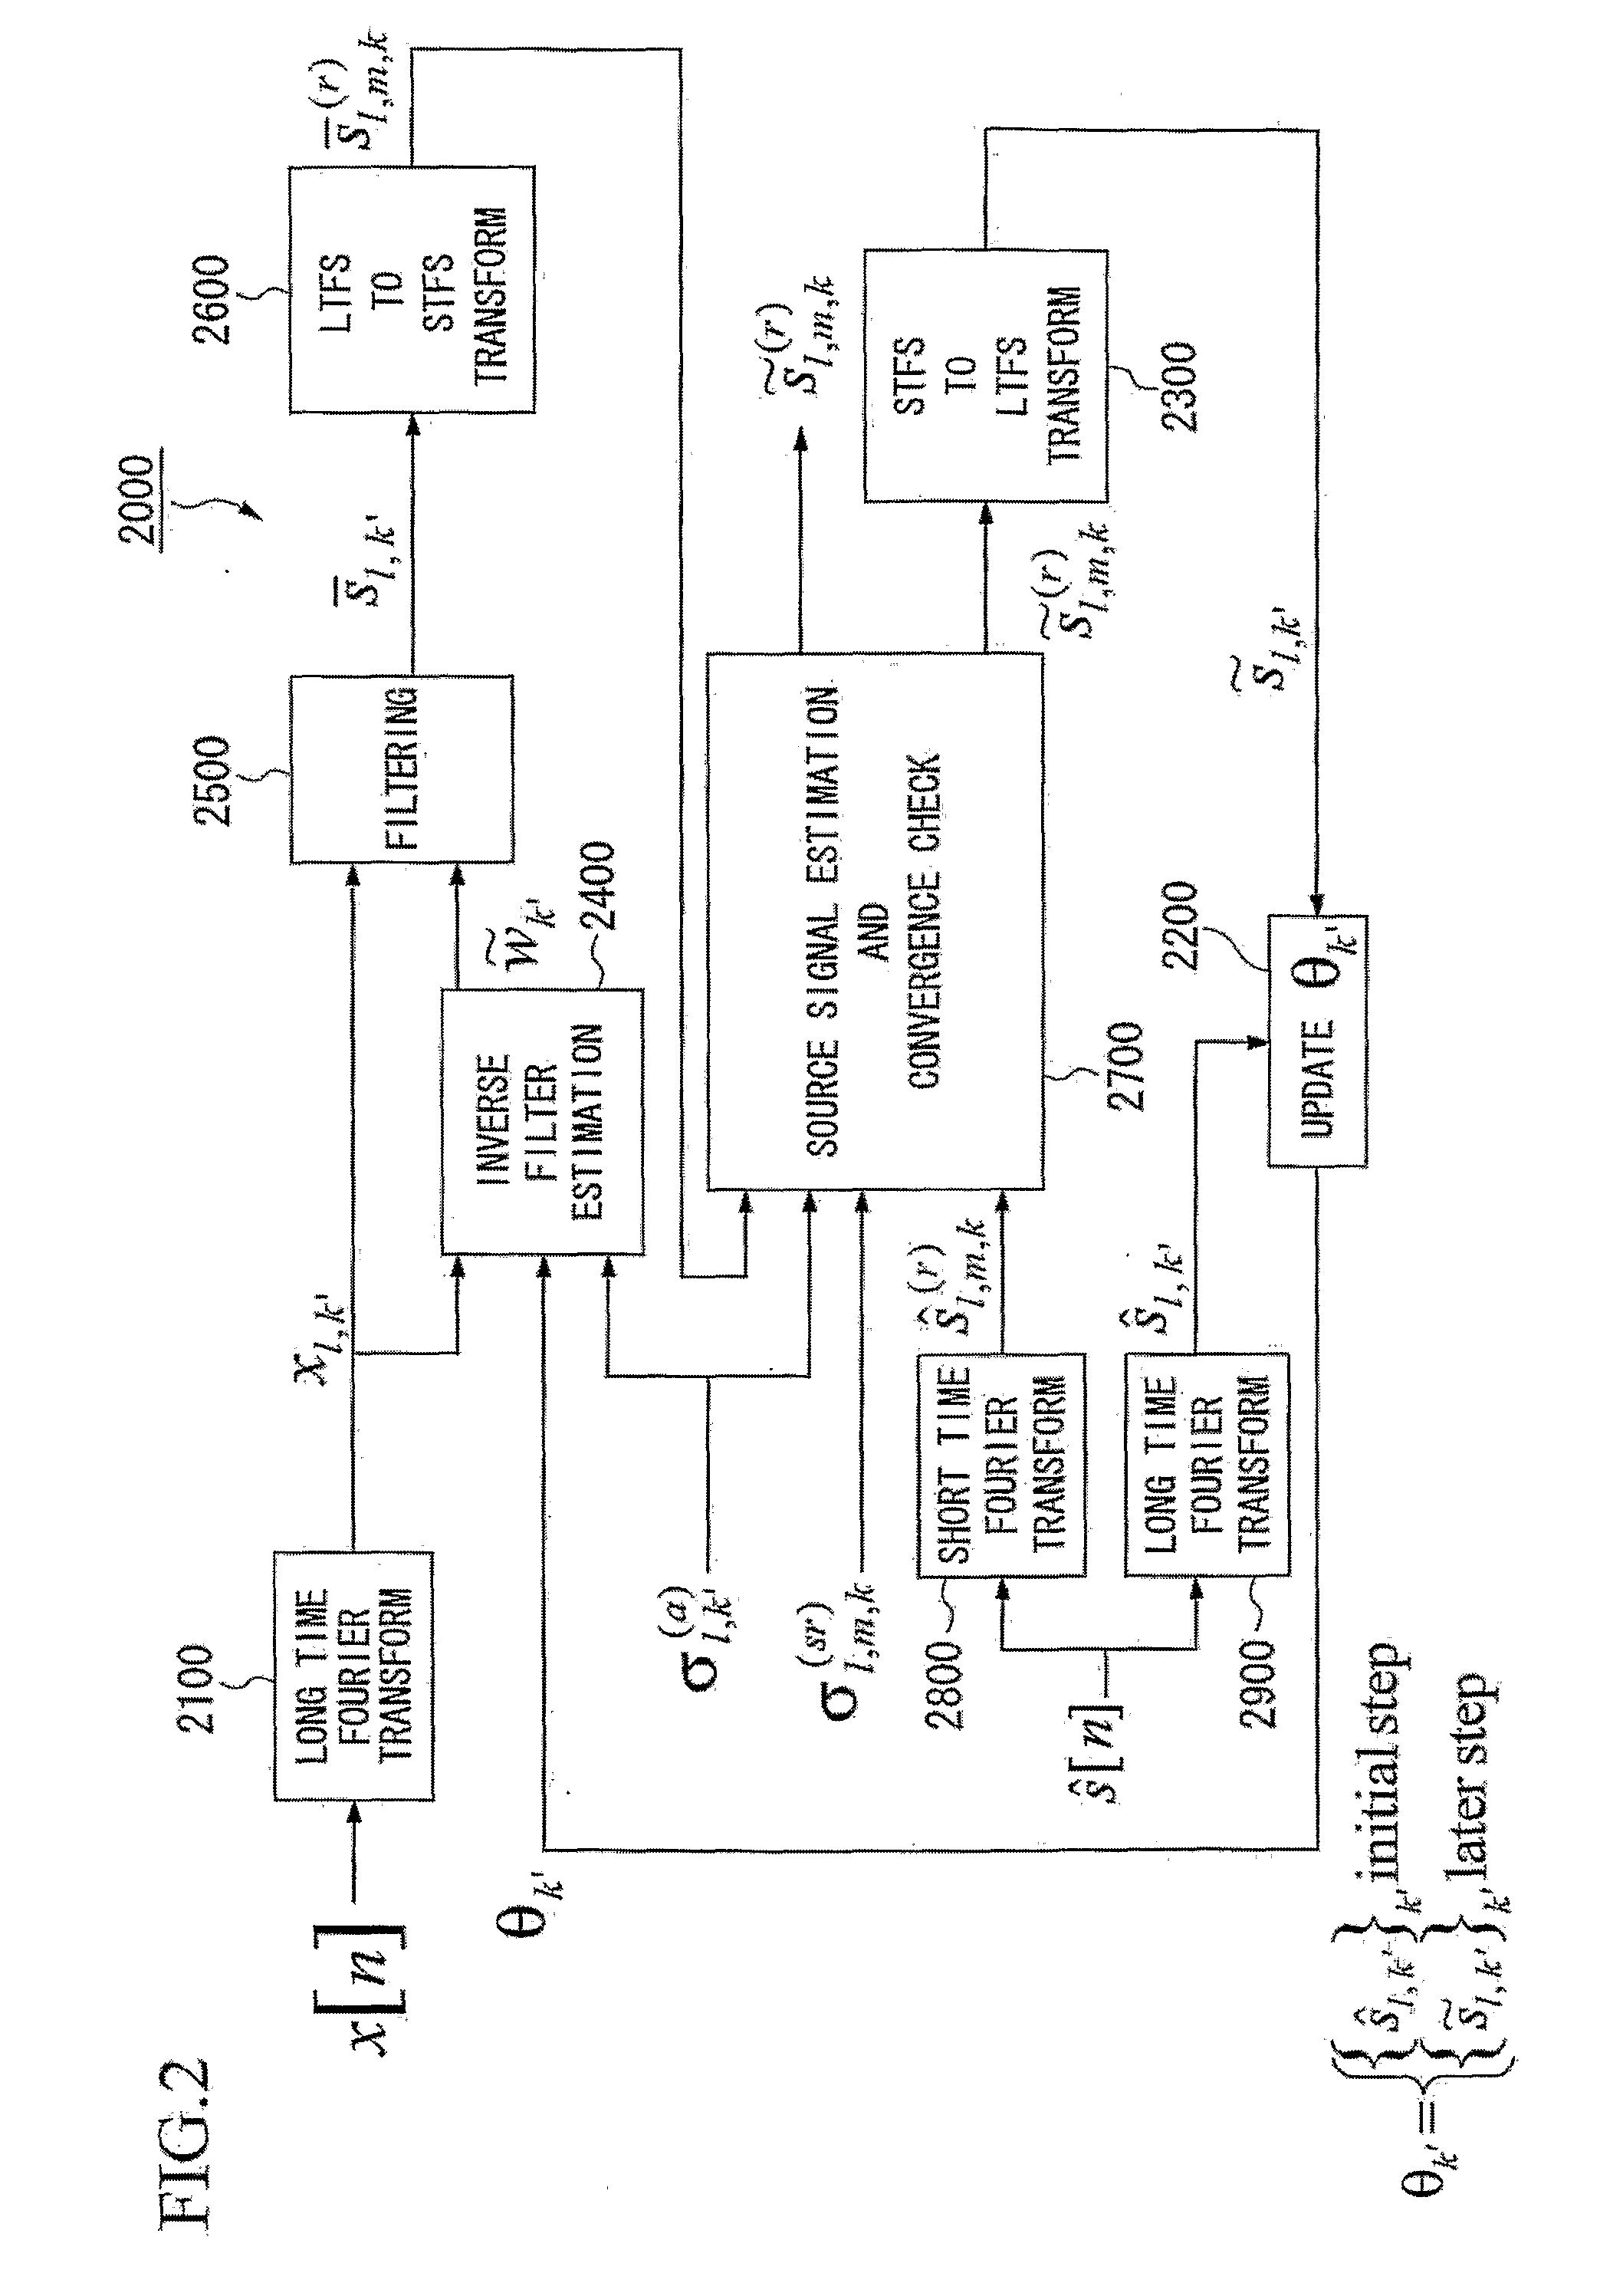 Method and Apparatus for Speech Dereverberation Based On Probabilistic Models Of Source And Room Acoustics